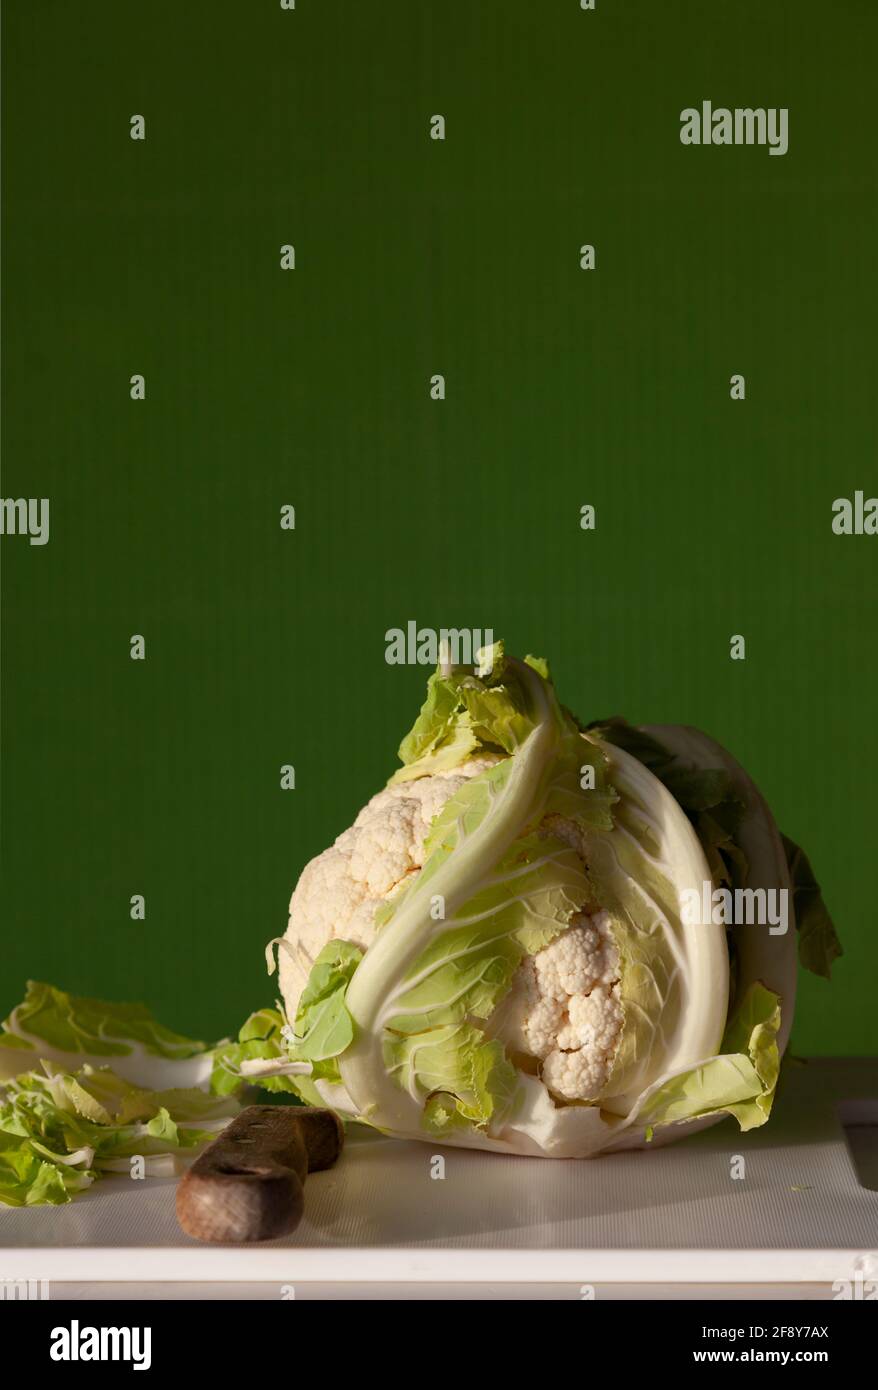 A  whole cauliflower on a white chopping board with knife and a plain green striped coloured background Stock Photo